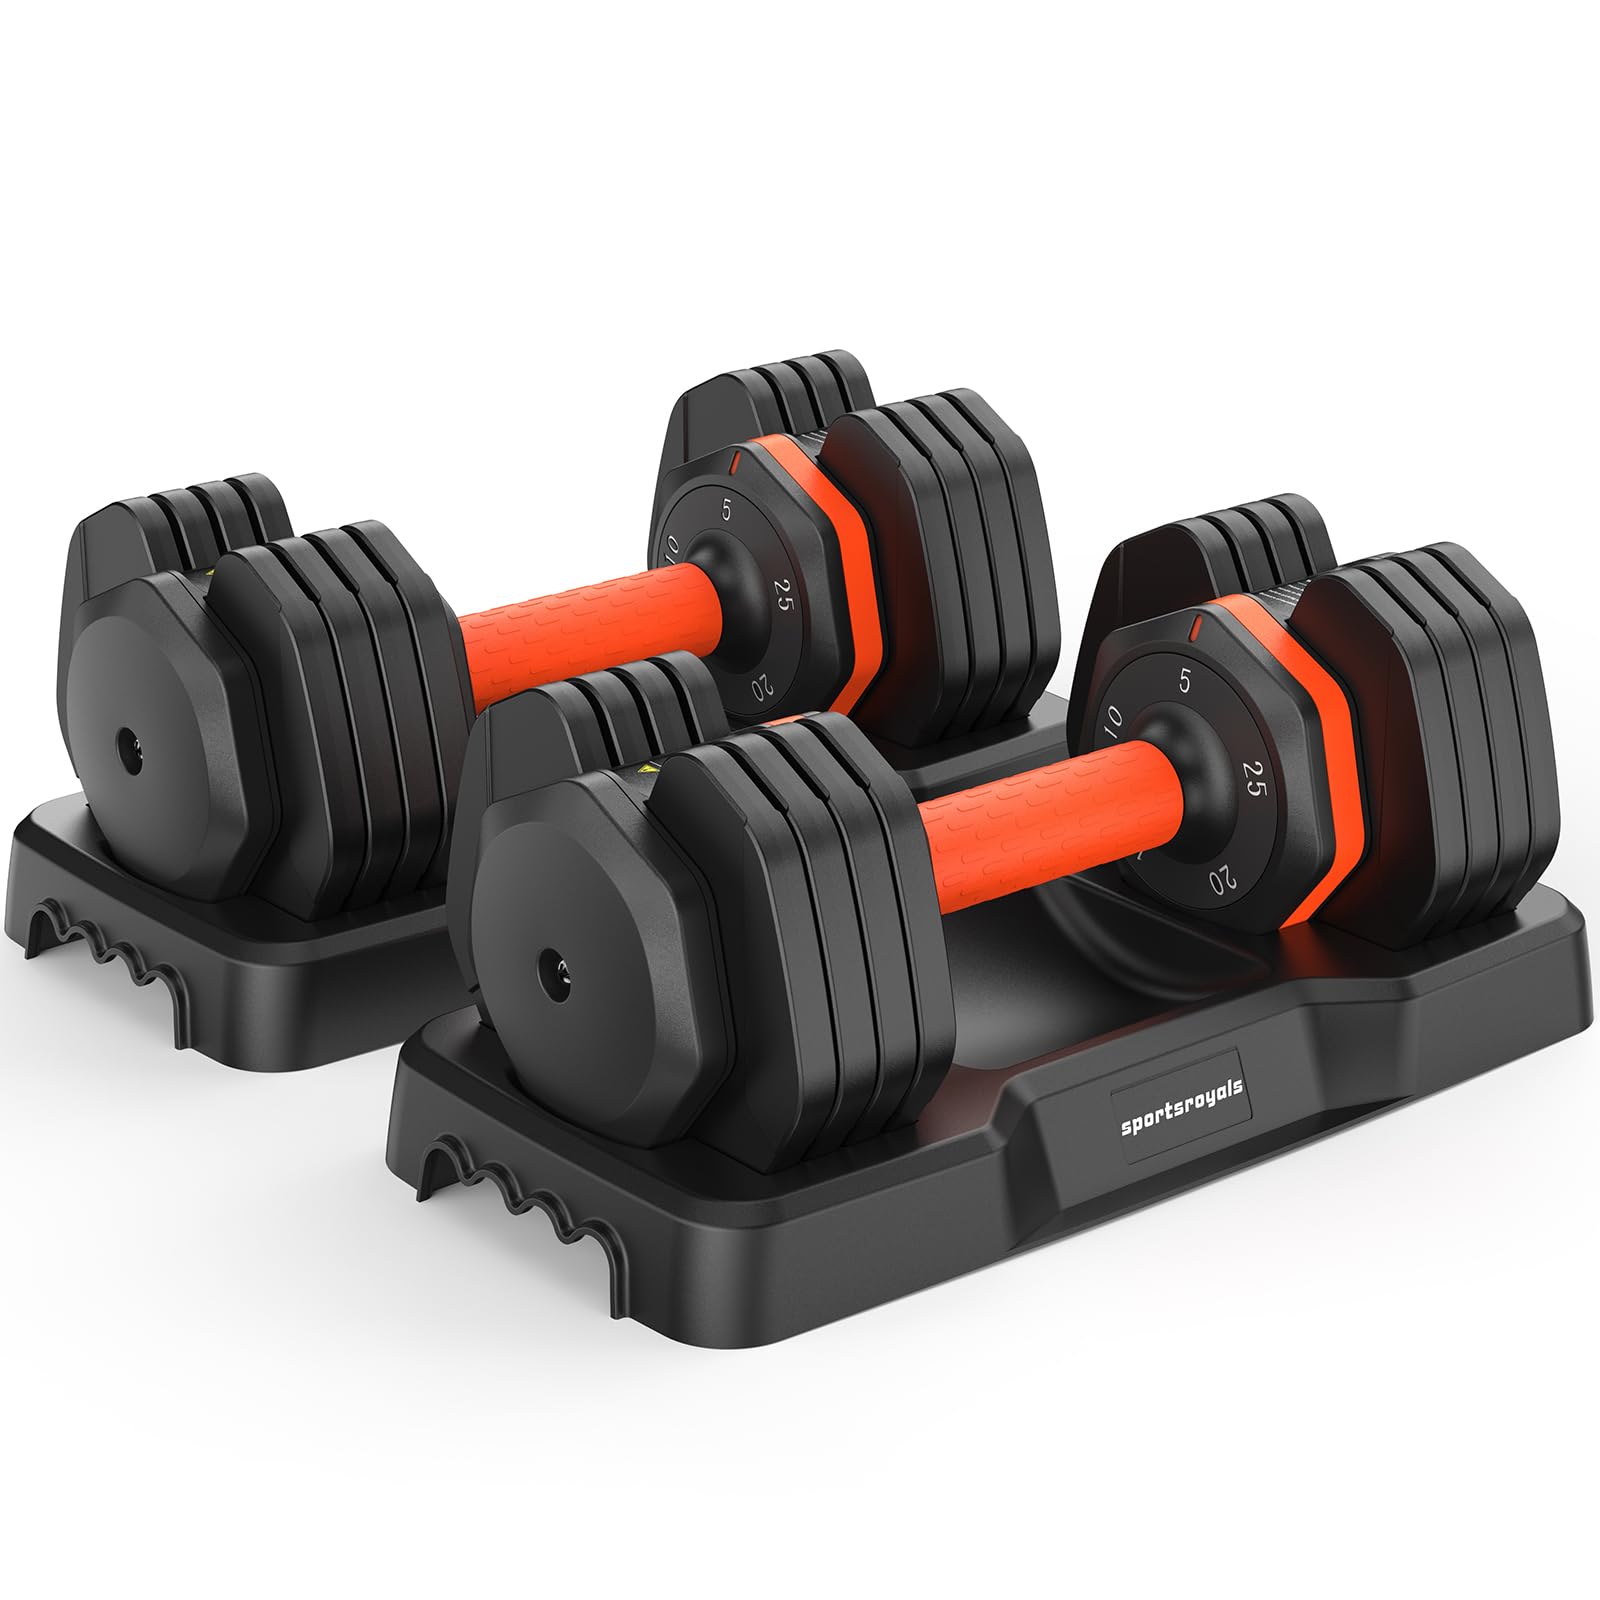 Sportsroyals Adjustable Dumbbells Set 25LB/55LB A Pair Dumbbell Weight,5 in 1 Free Weights 5/10/15/20/25lb/50lb Dumbbell with Anti-Slip Handle, Suitable for Home Gym Exercise Equipment